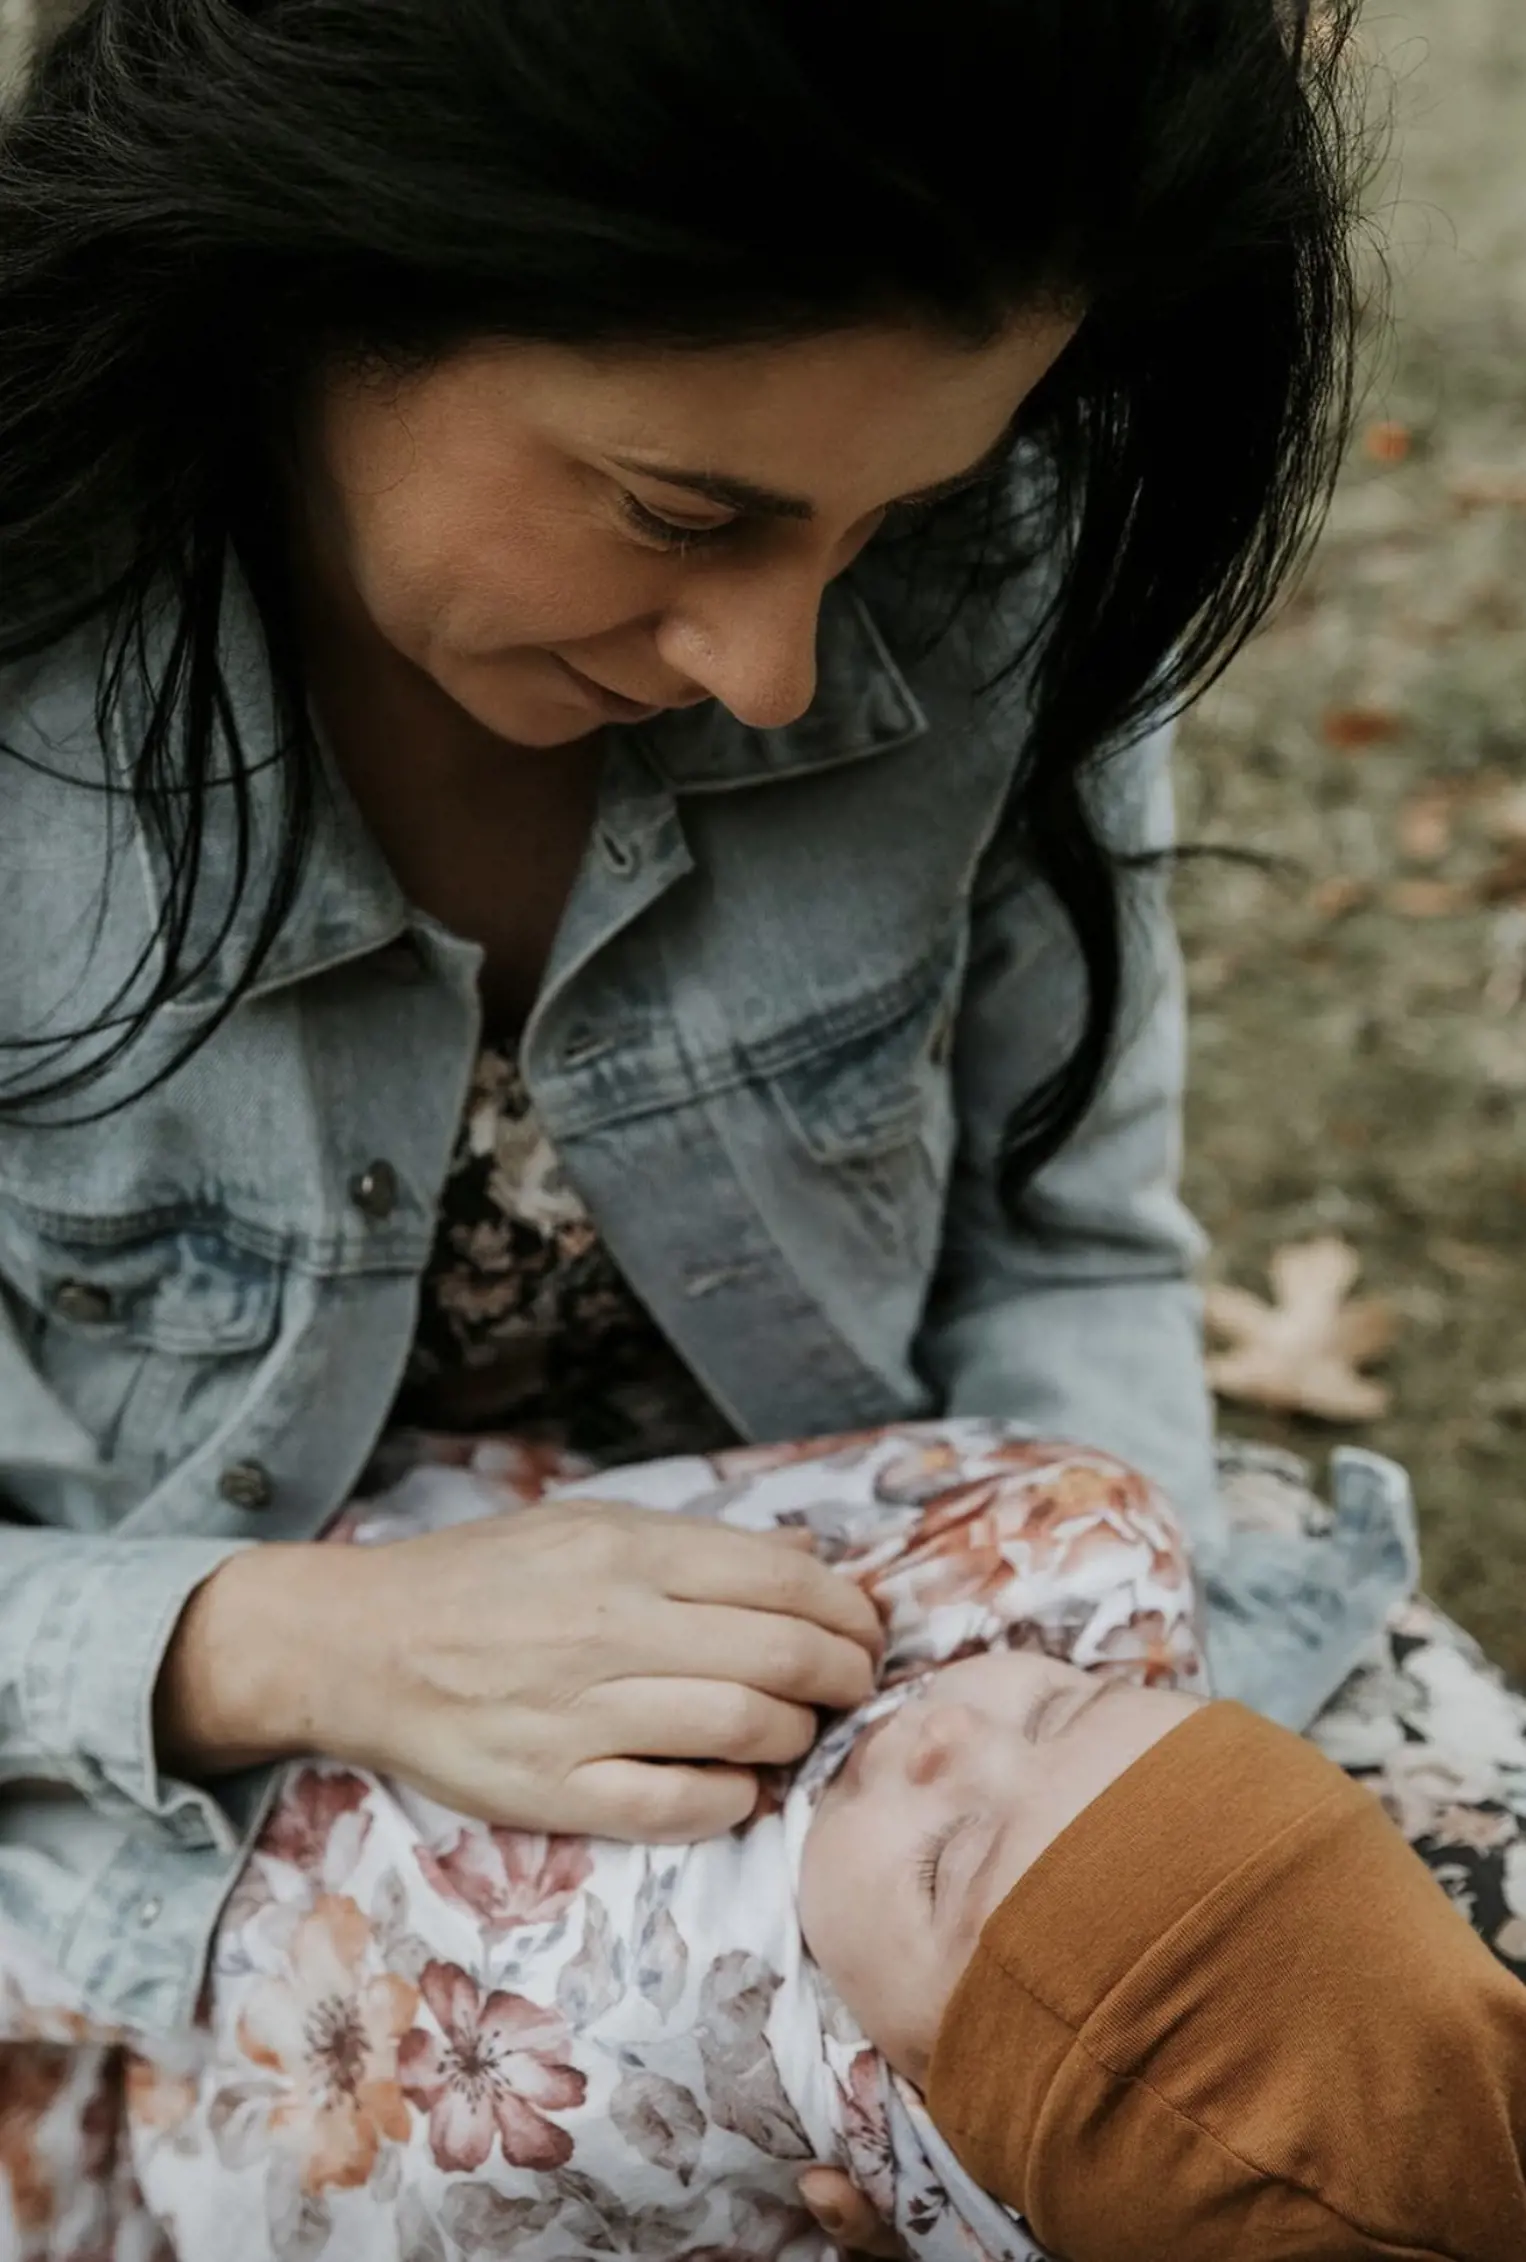 Shananne, with long dark hair and a denim jacket, is holding her baby